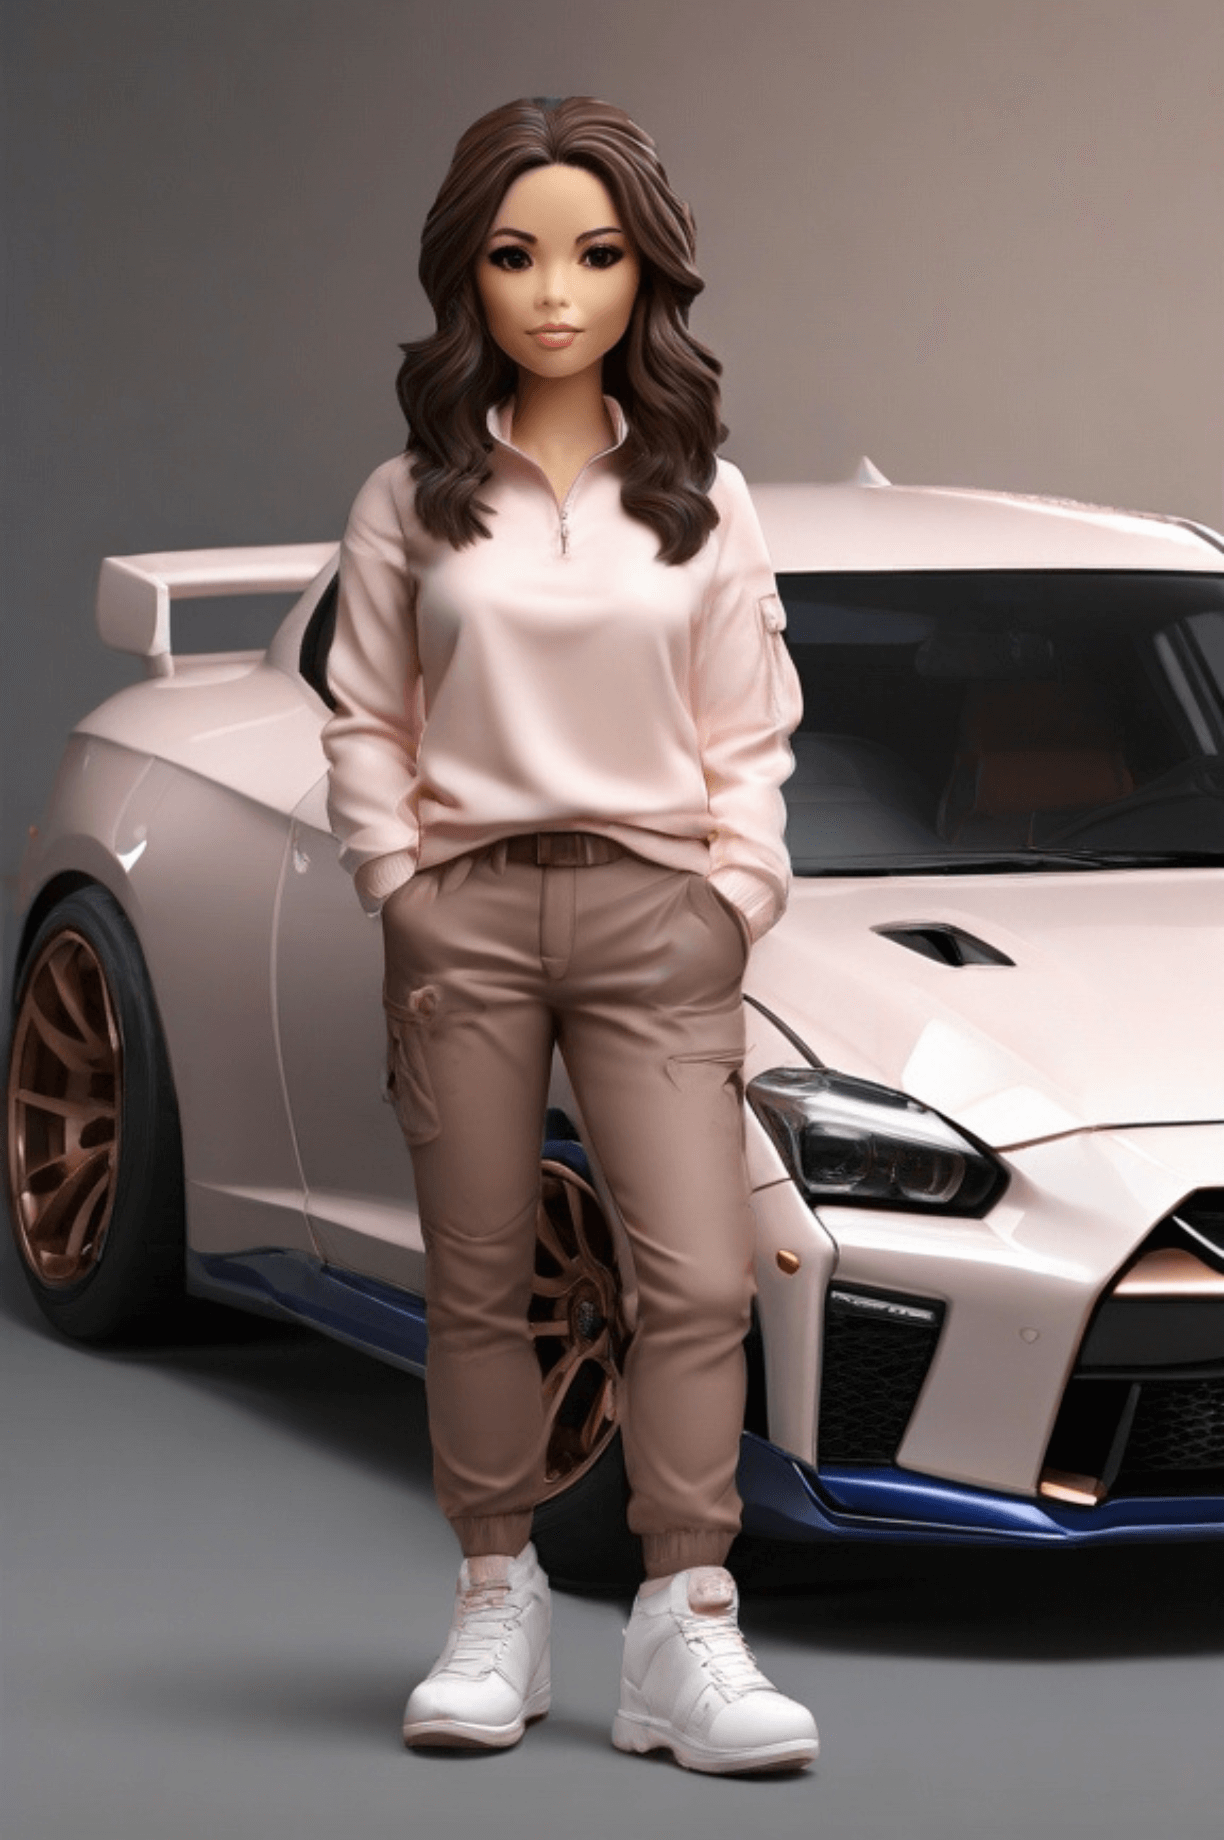 "Create a detailed visual representation of a female Funko Pop! character with long, straight, dark brown hair. She is adorned in a white and pink sweater paired with dark blue cargo pants, complemented by rose gold Nike sneakers. In the background, there's a Nissan Skyline GTR R35, dark rose gold in color with black rims. The entire scene should be rendered in 4K resolution, featuring studio lighting reminiscent of a product photo, showcasing the character alongside the stylish Nissan Skyline GTR."